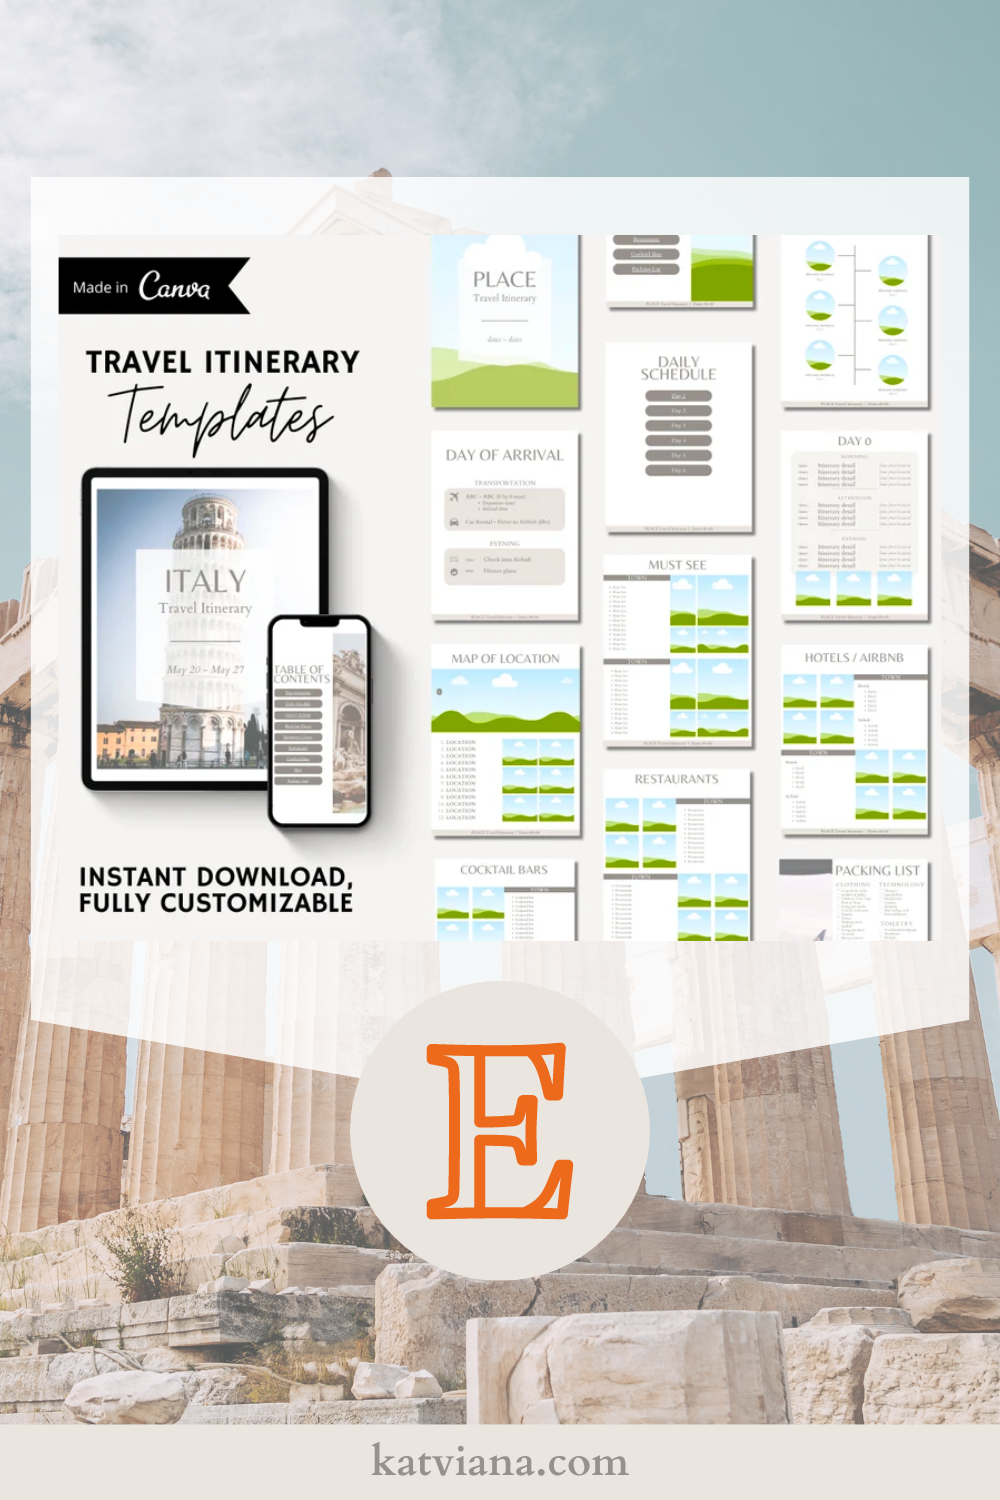 Greece 1 Week Itinerary - editable travel guide template